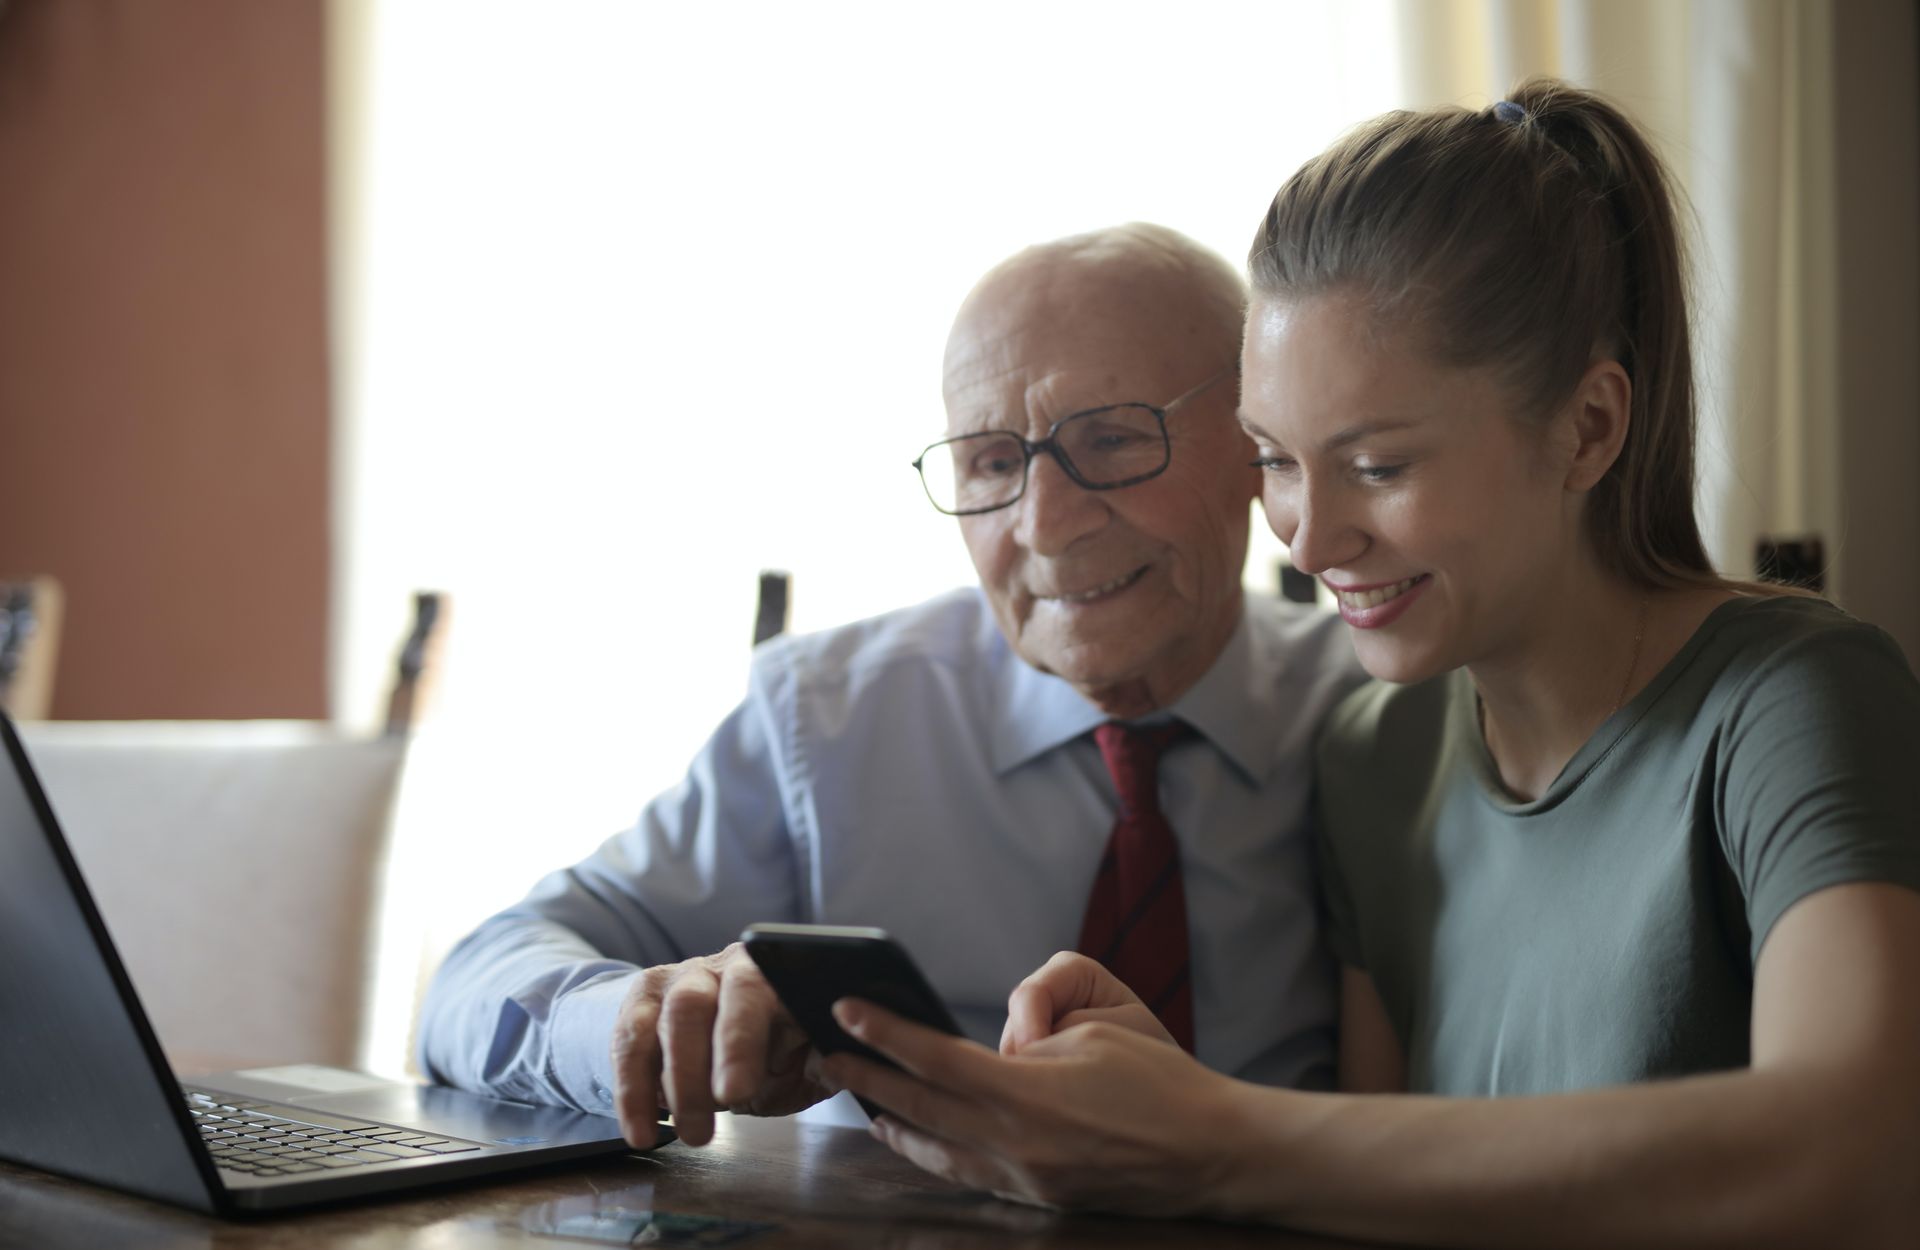 Grandfather in suit sat with his adult granddaughter in front of laptop